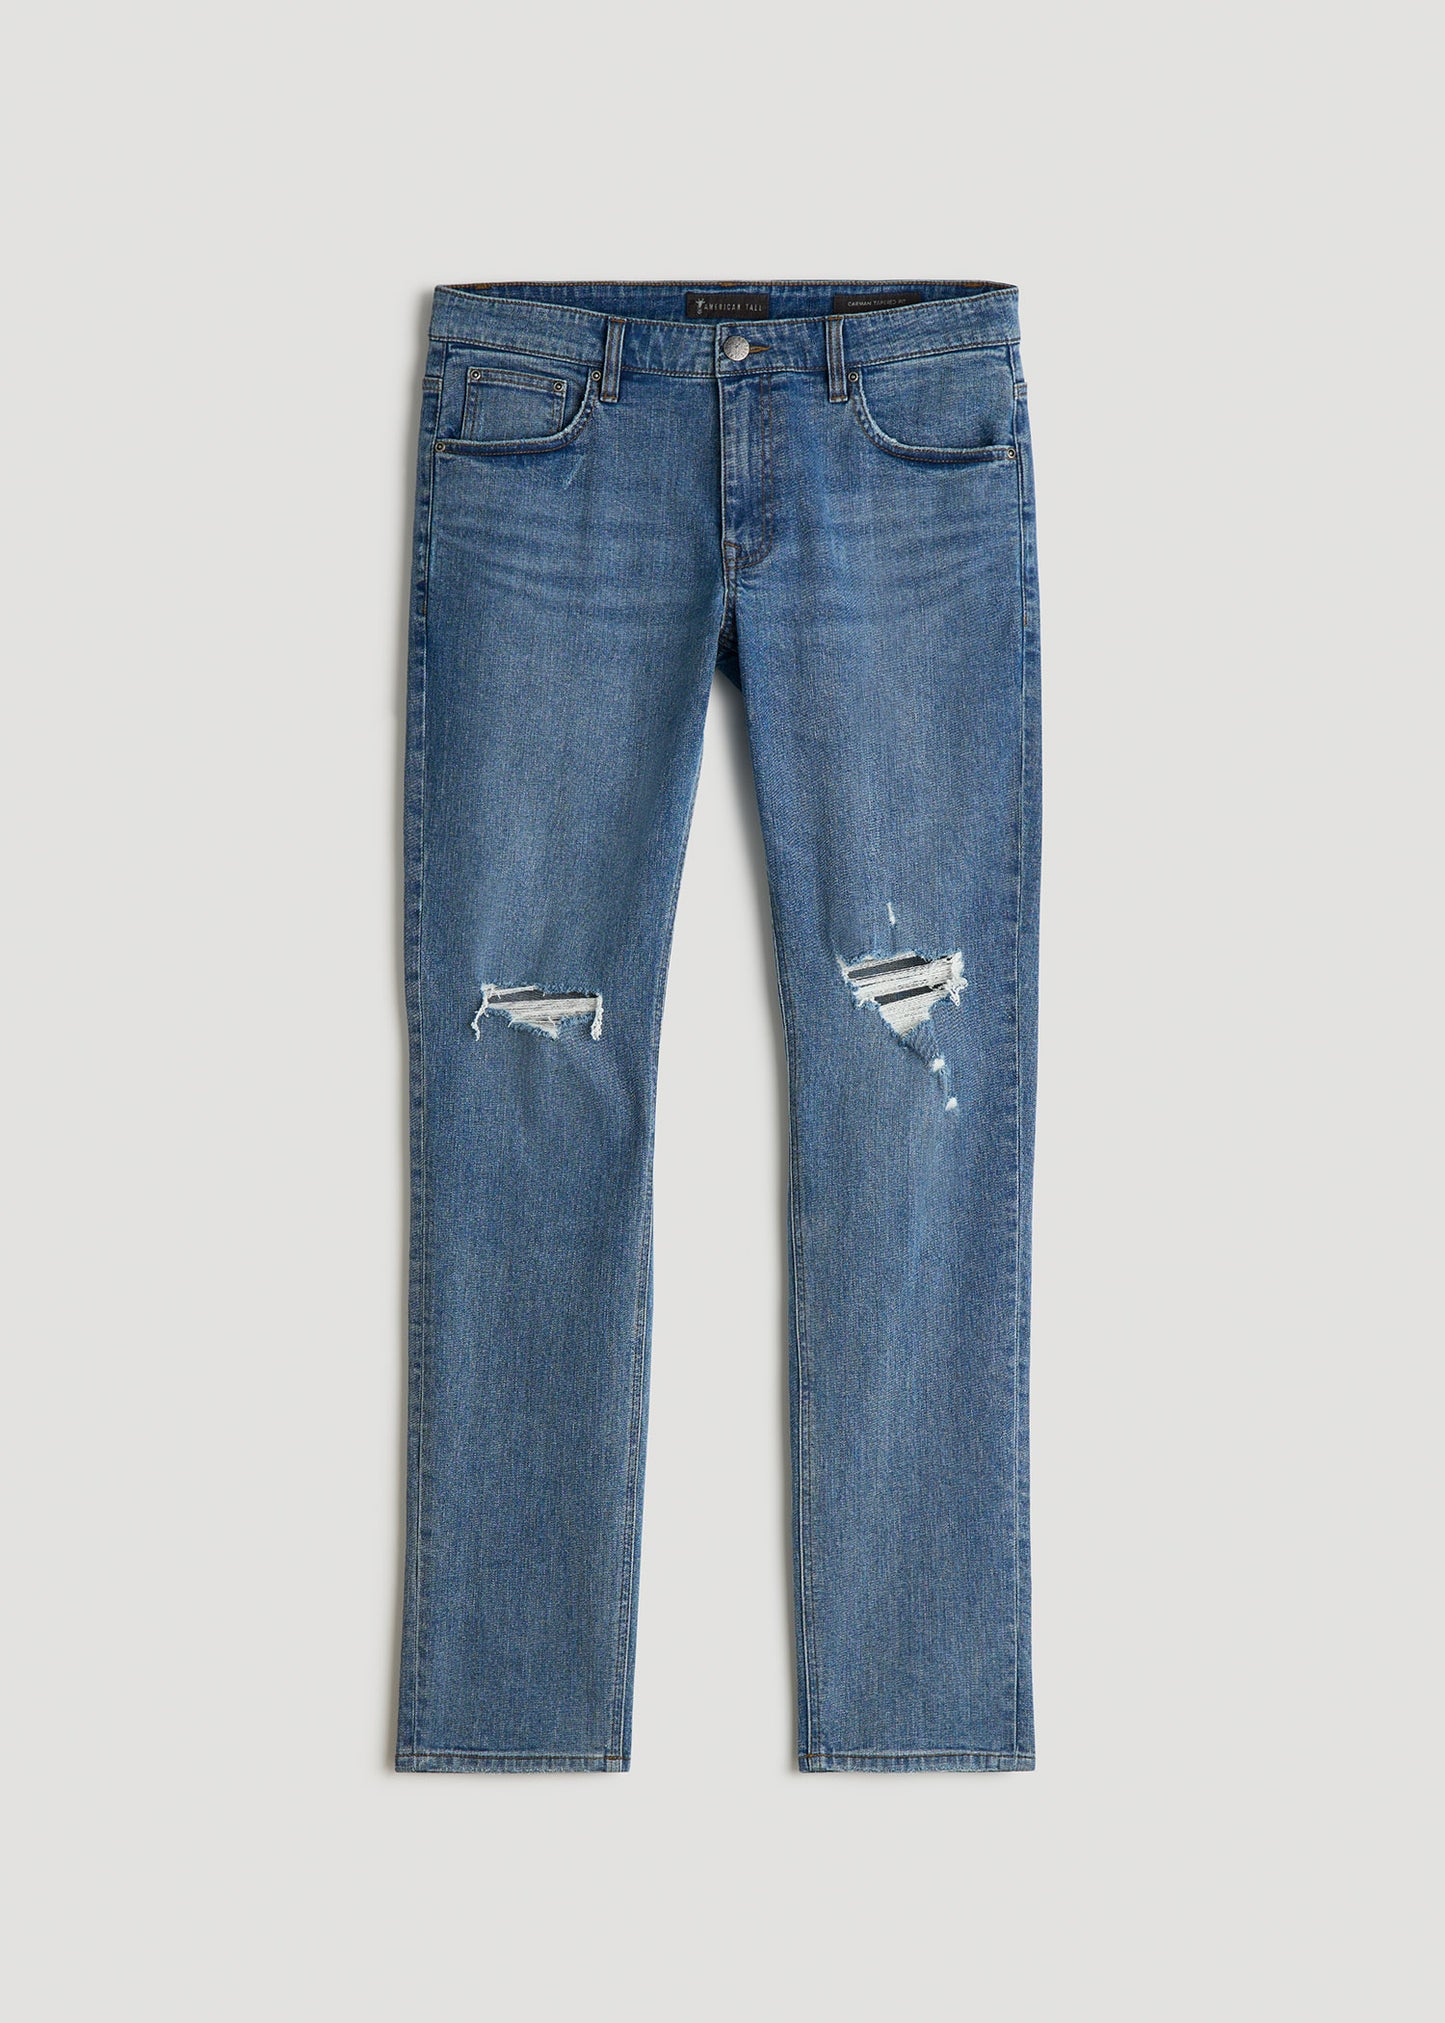 Carman TAPERED Jeans for Tall Men in Distressed Skyline Blue